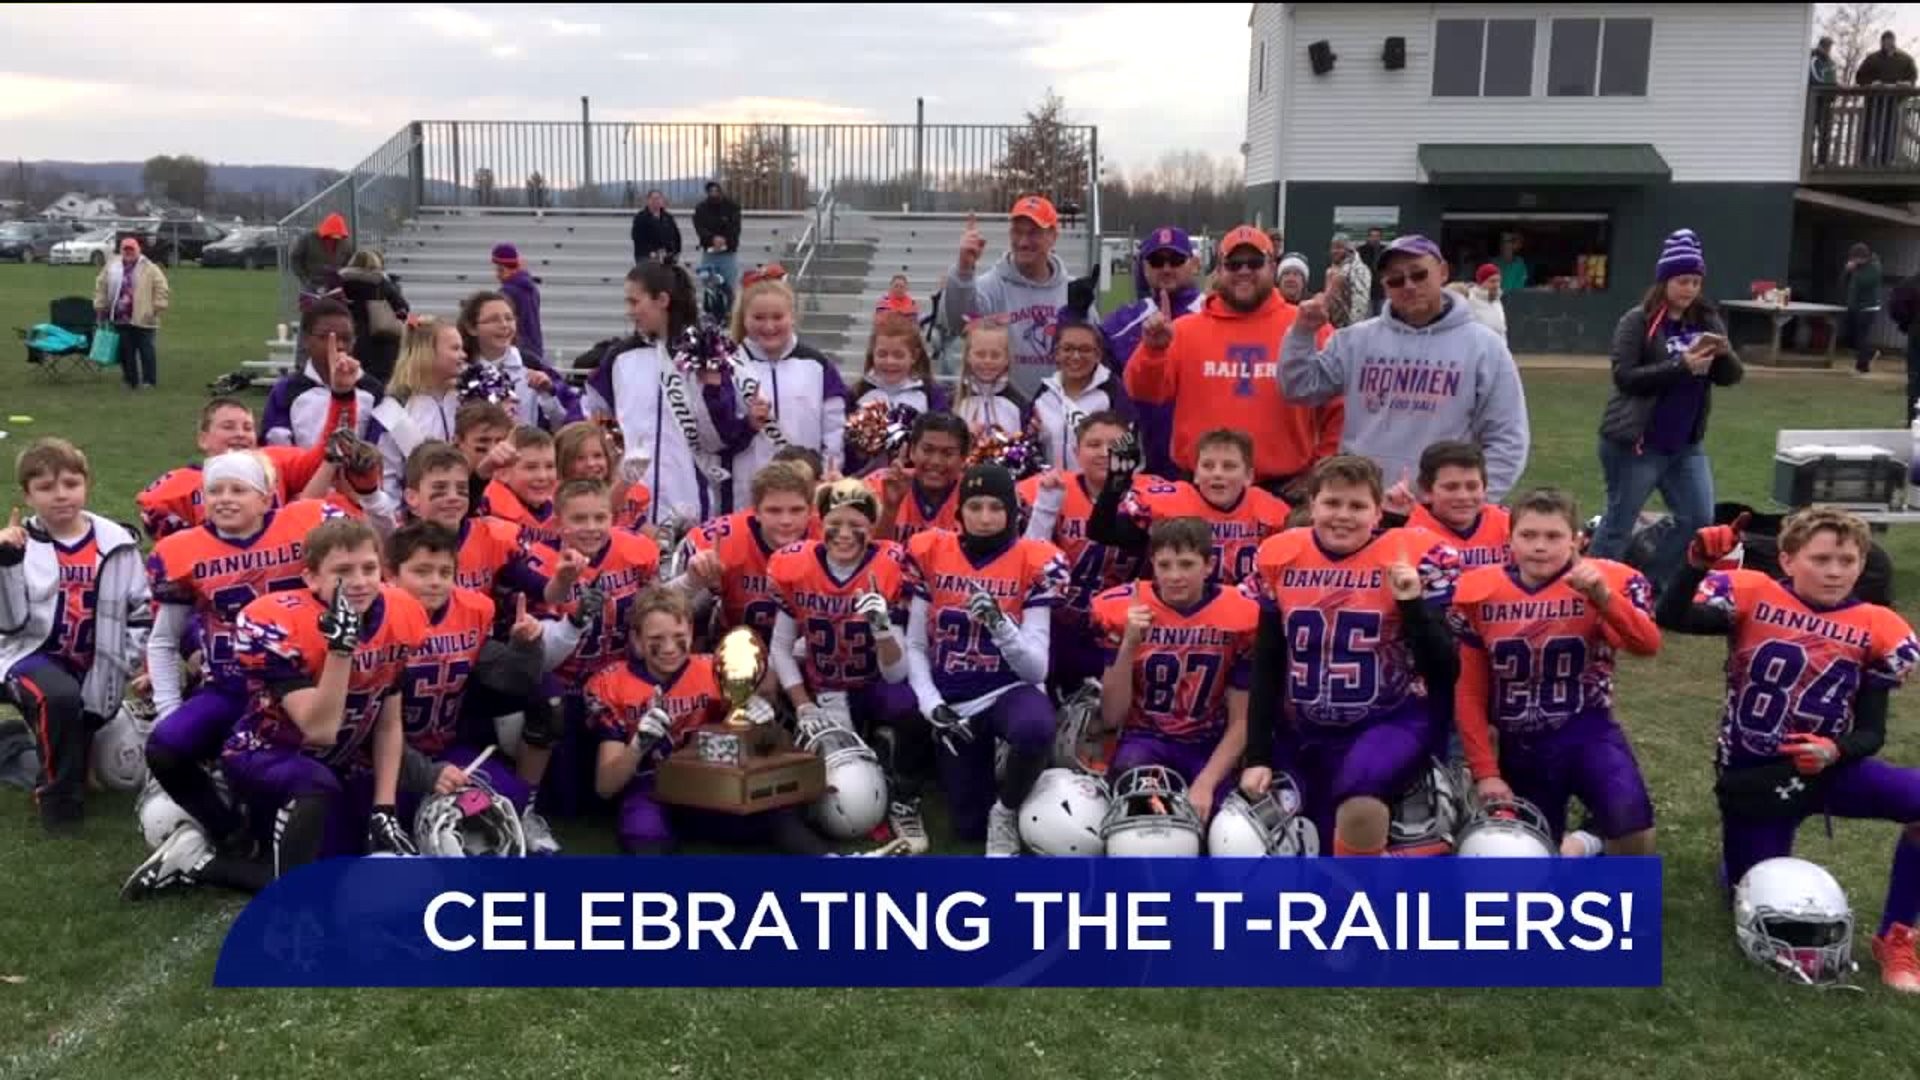 Celebrating the Danville T-Railers Youth Football Team